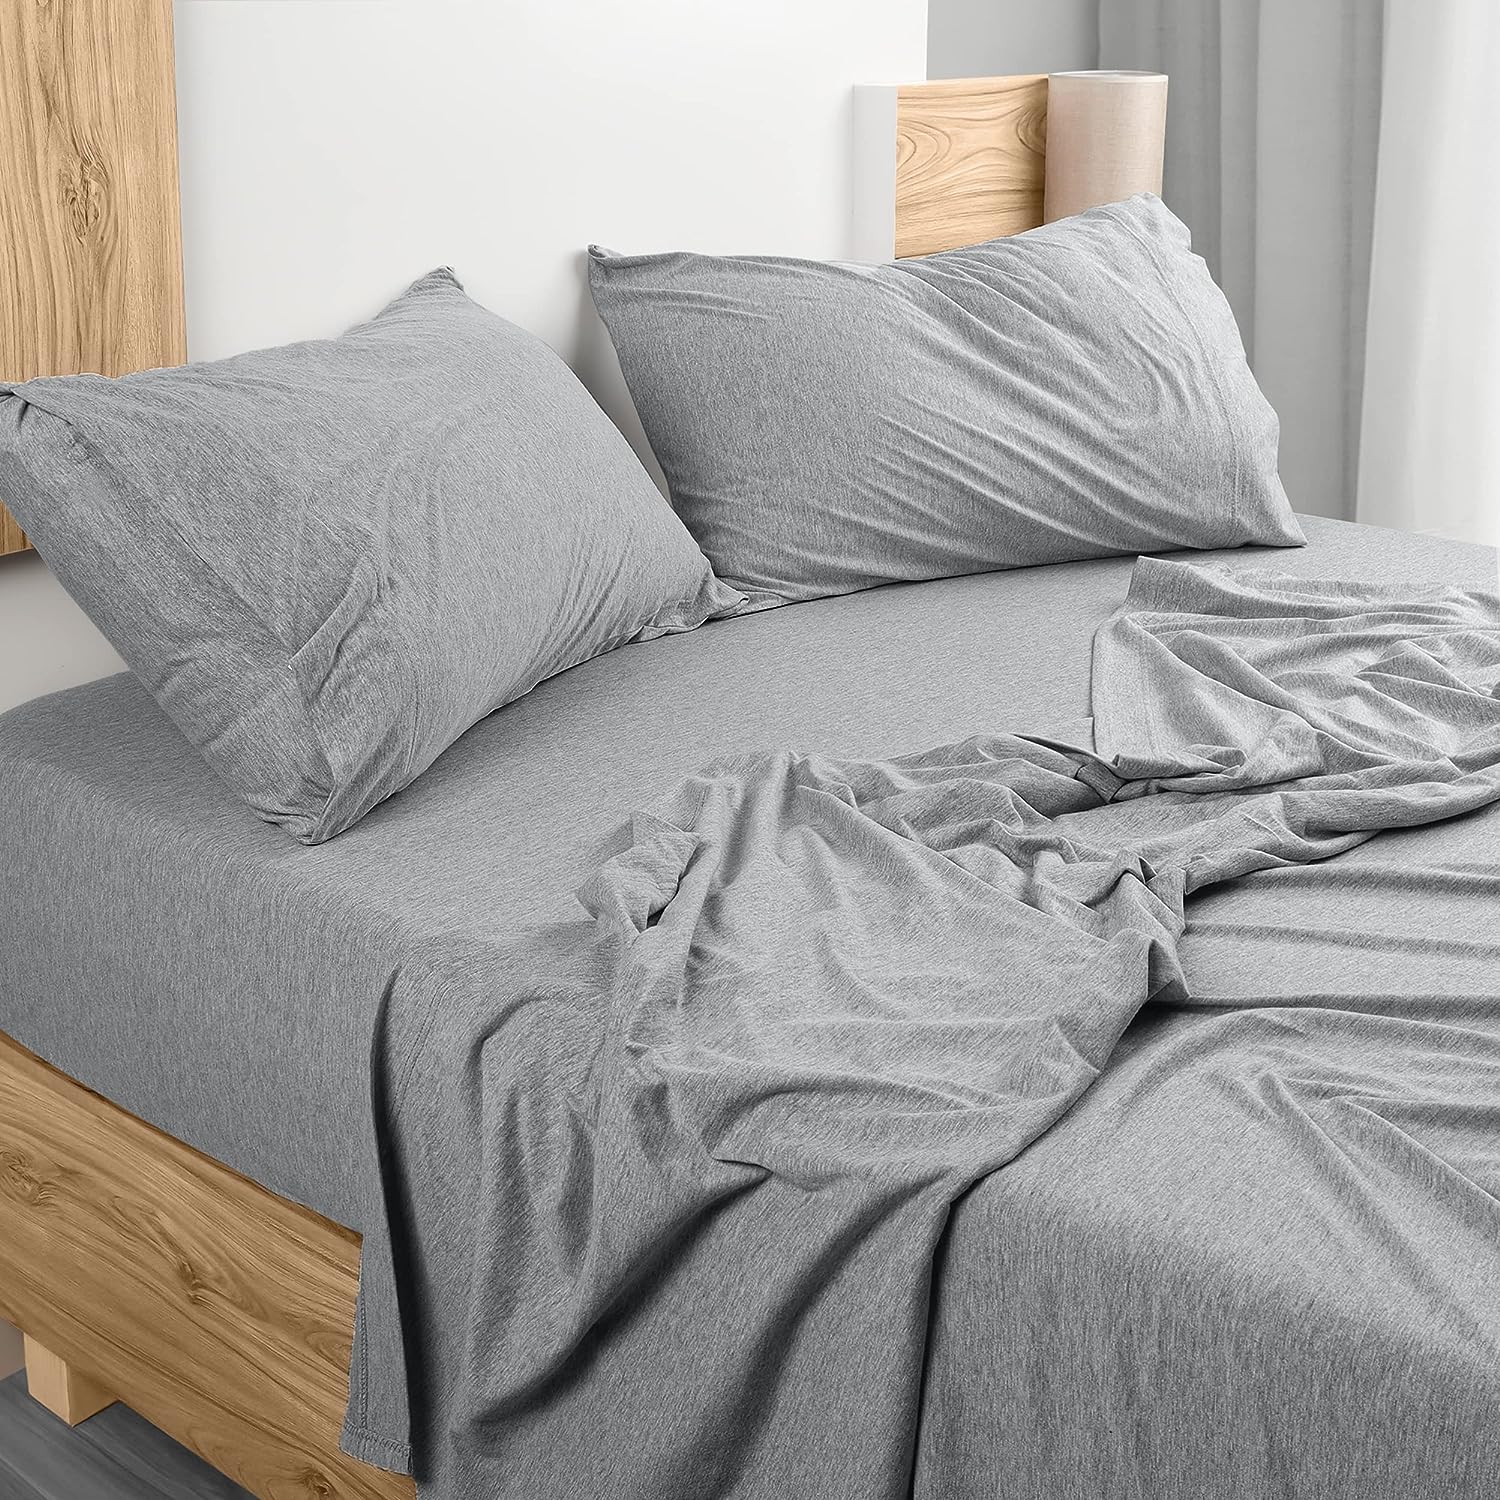 Utopia Deals Offers Bedding, Home, Kitchen Products at Wholesale Rates